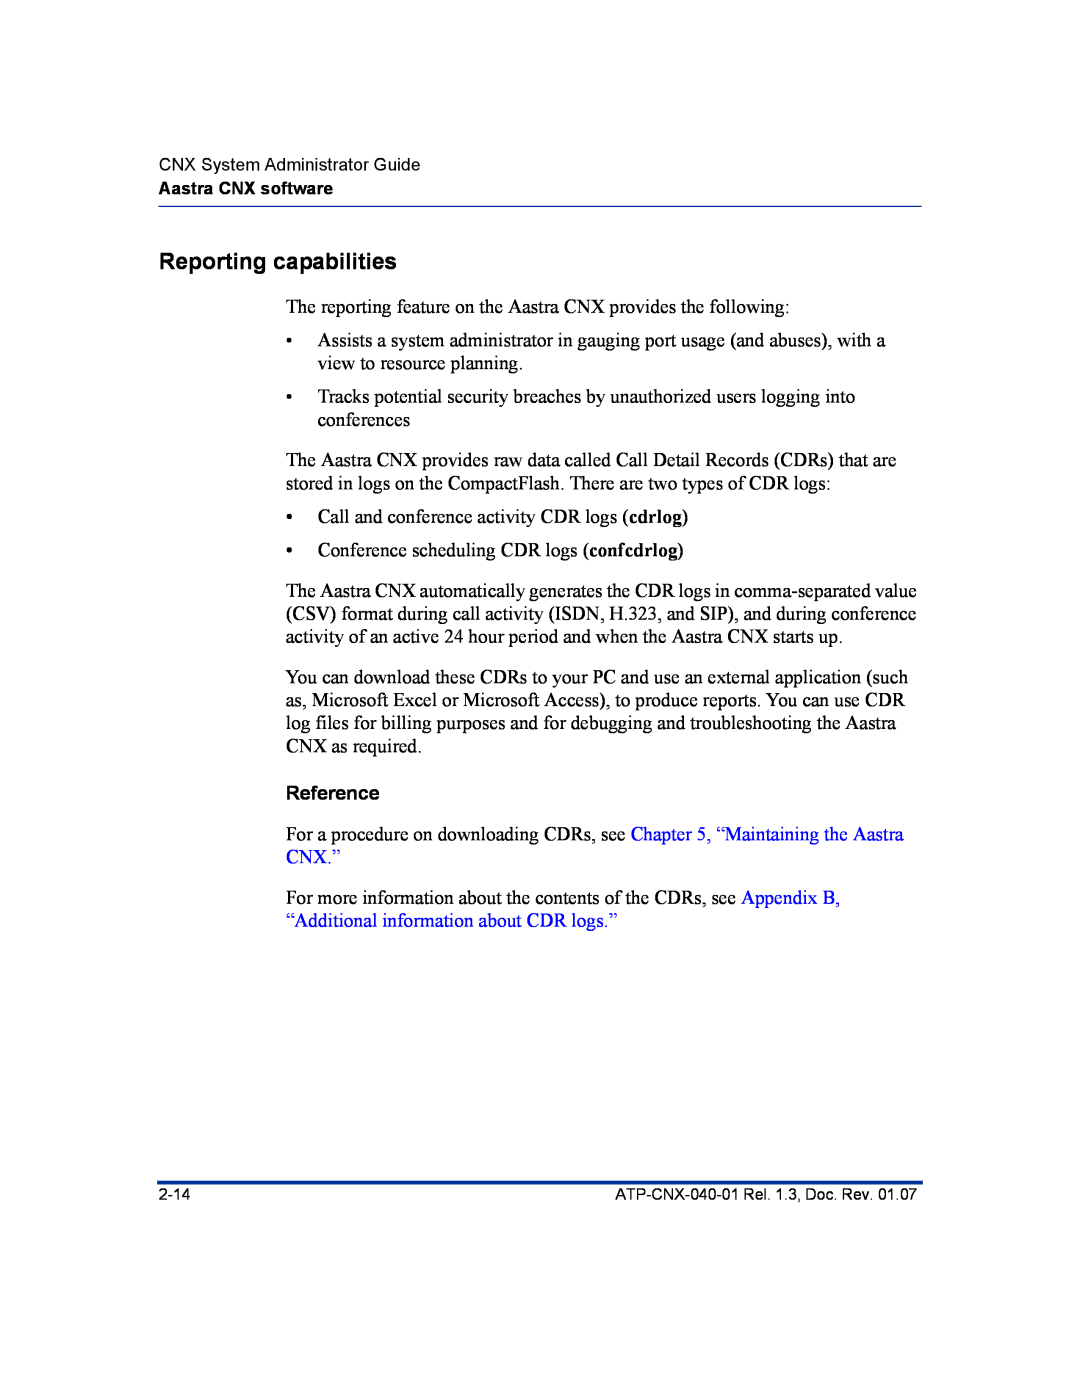 Aastra Telecom ATP-CNX-040-01 manual Reporting capabilities, Reference 